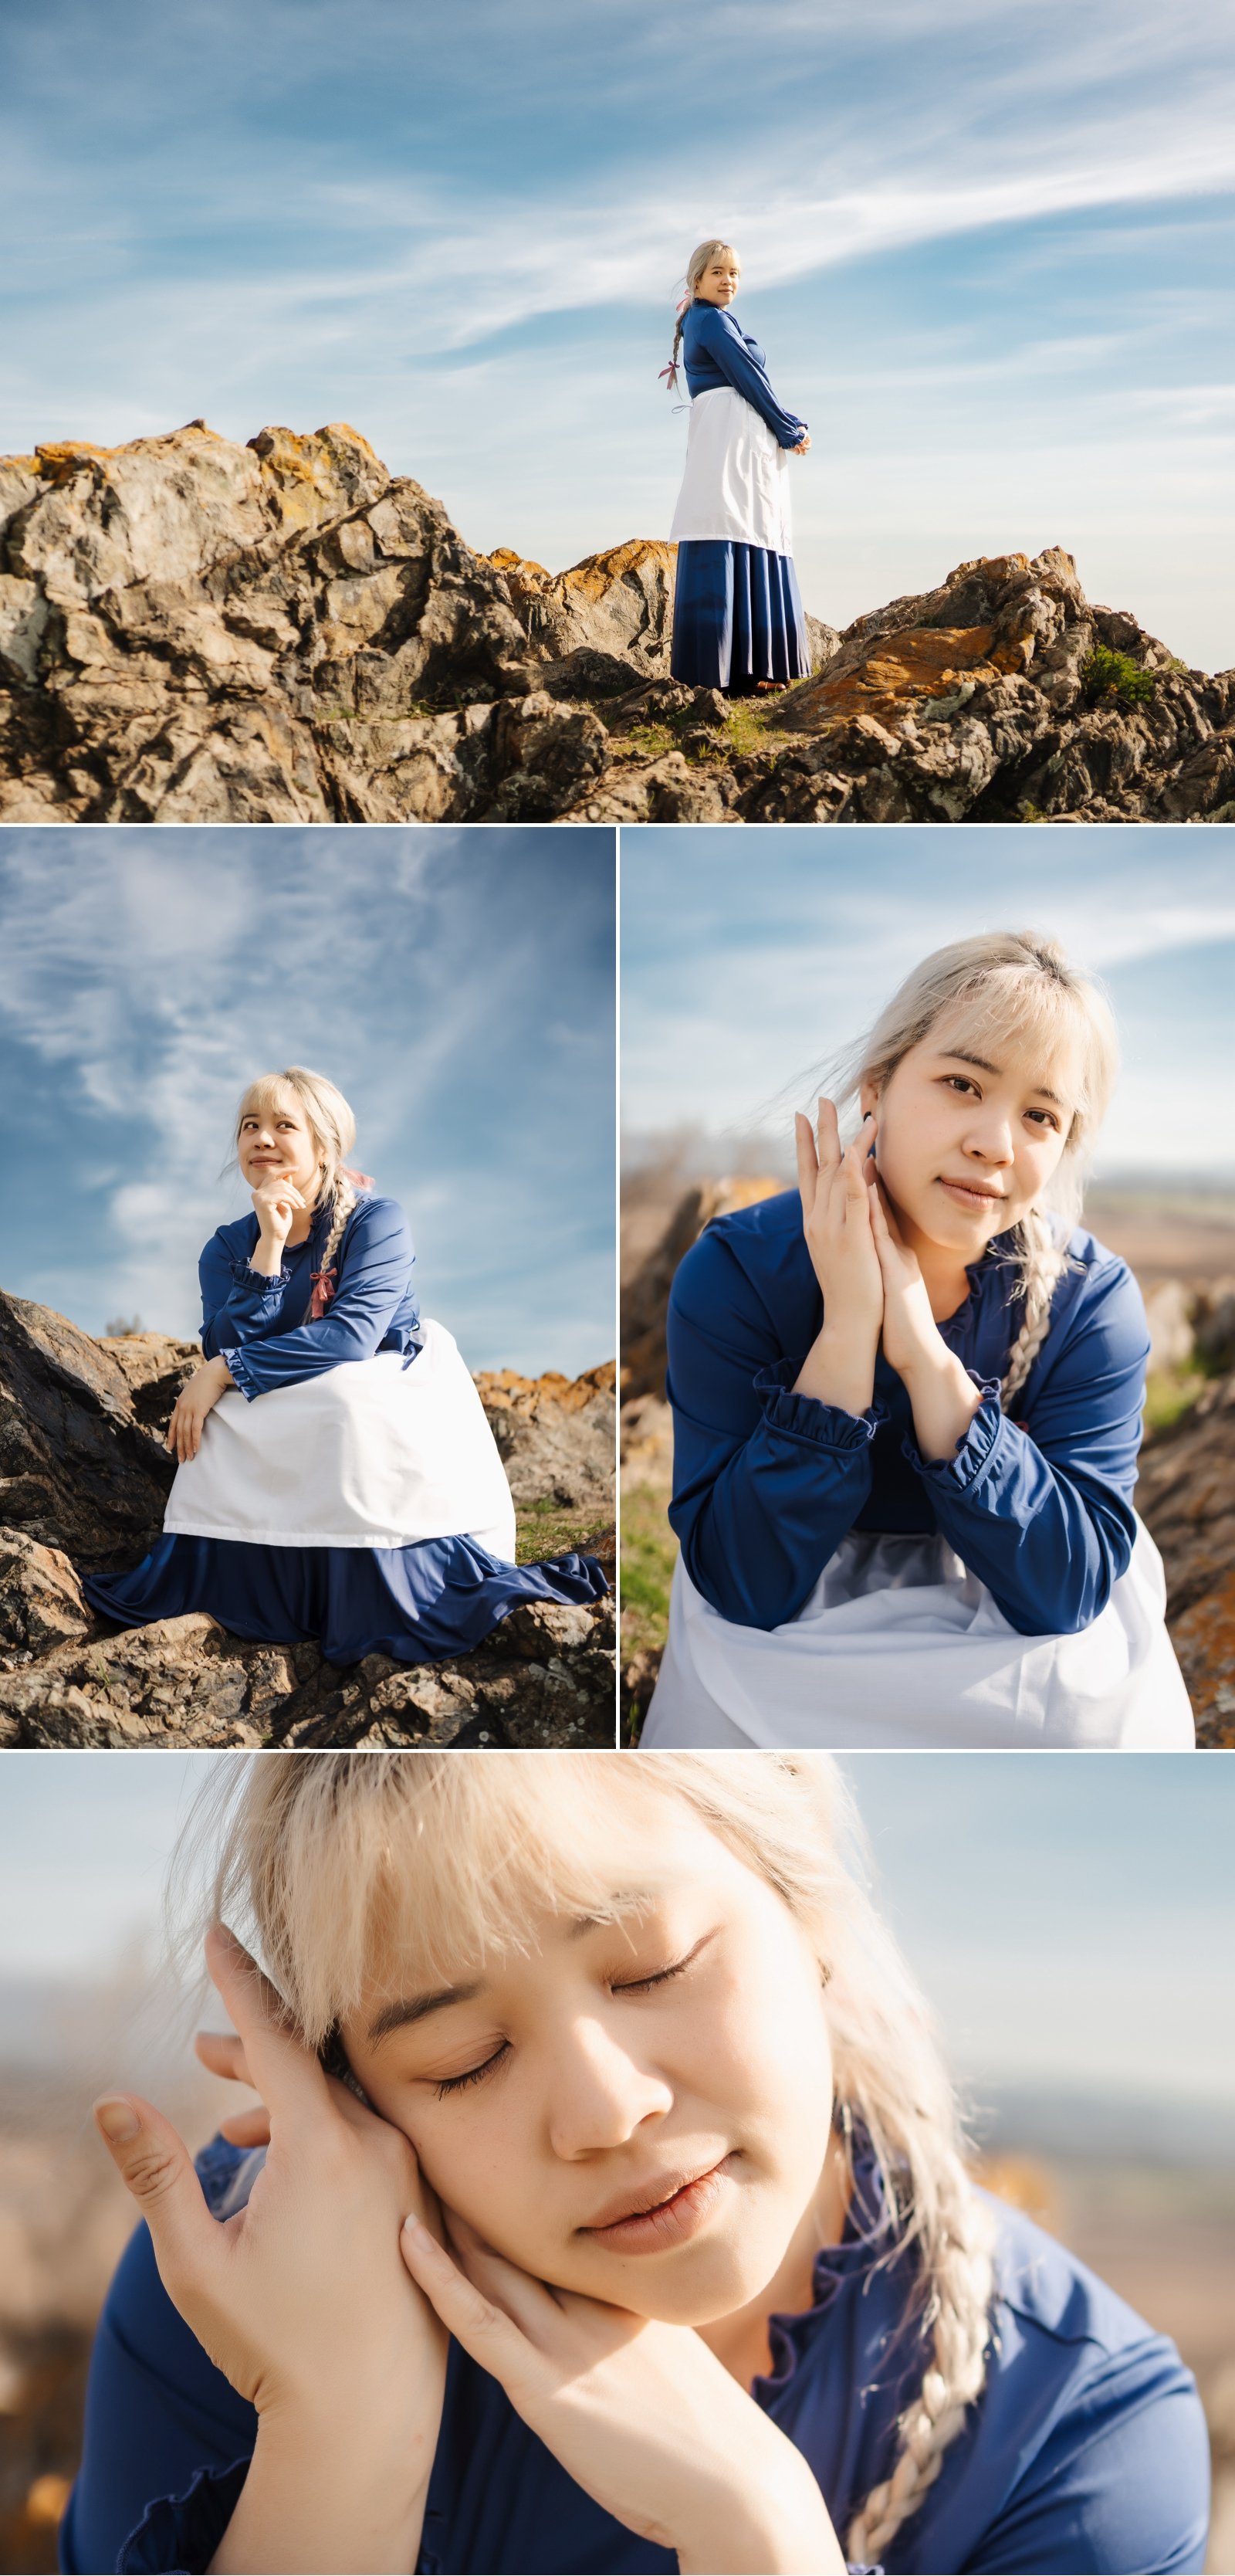 howl's moving castle sophie cosplay photoshoot bay area cosplay photographer 7.jpg